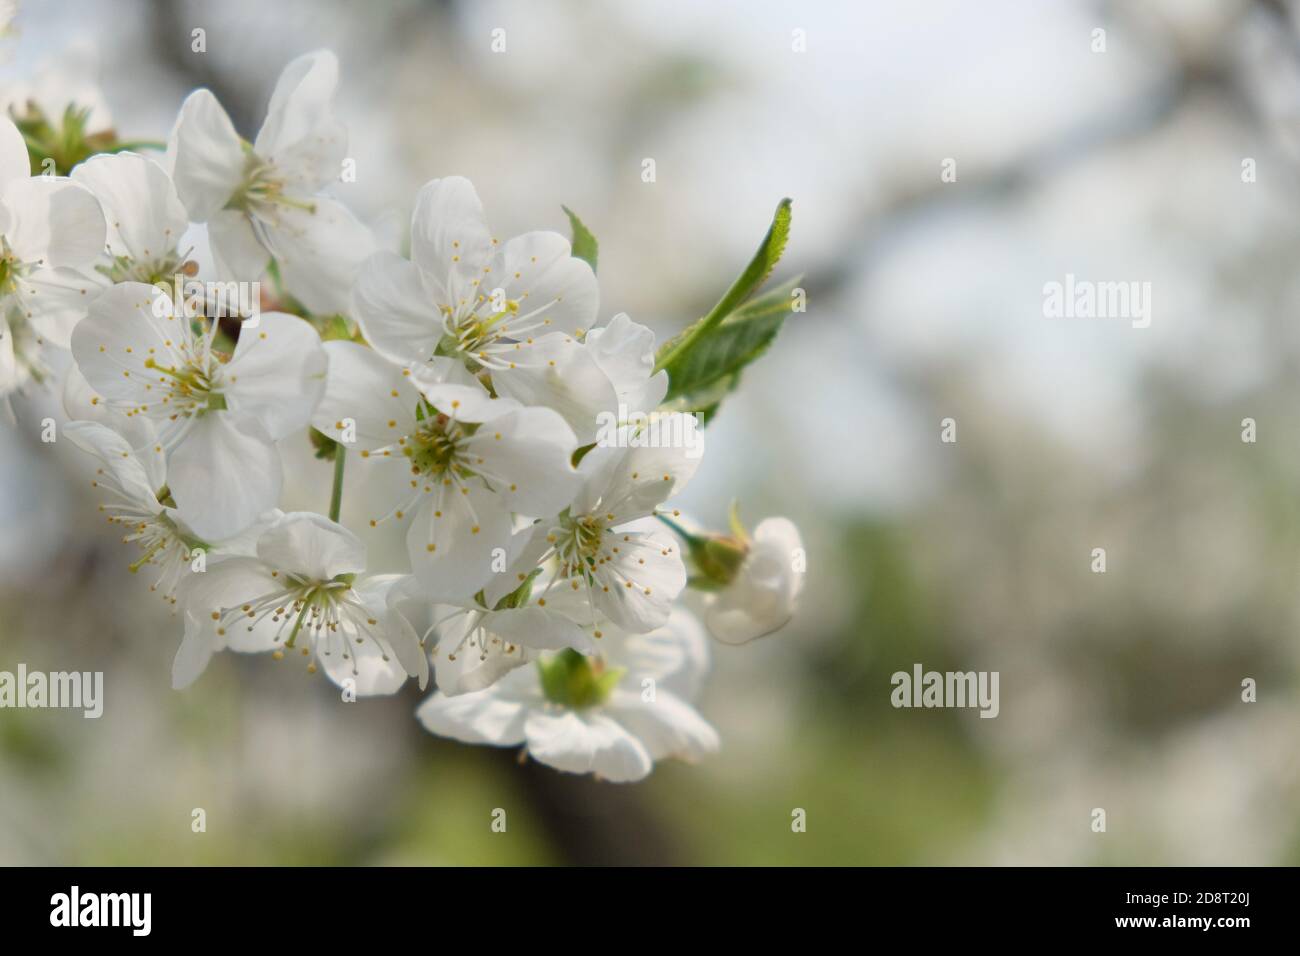 A branch of a blossoming cherry tree. Inflorescence of white cherry flowers in spring. Stock Photo